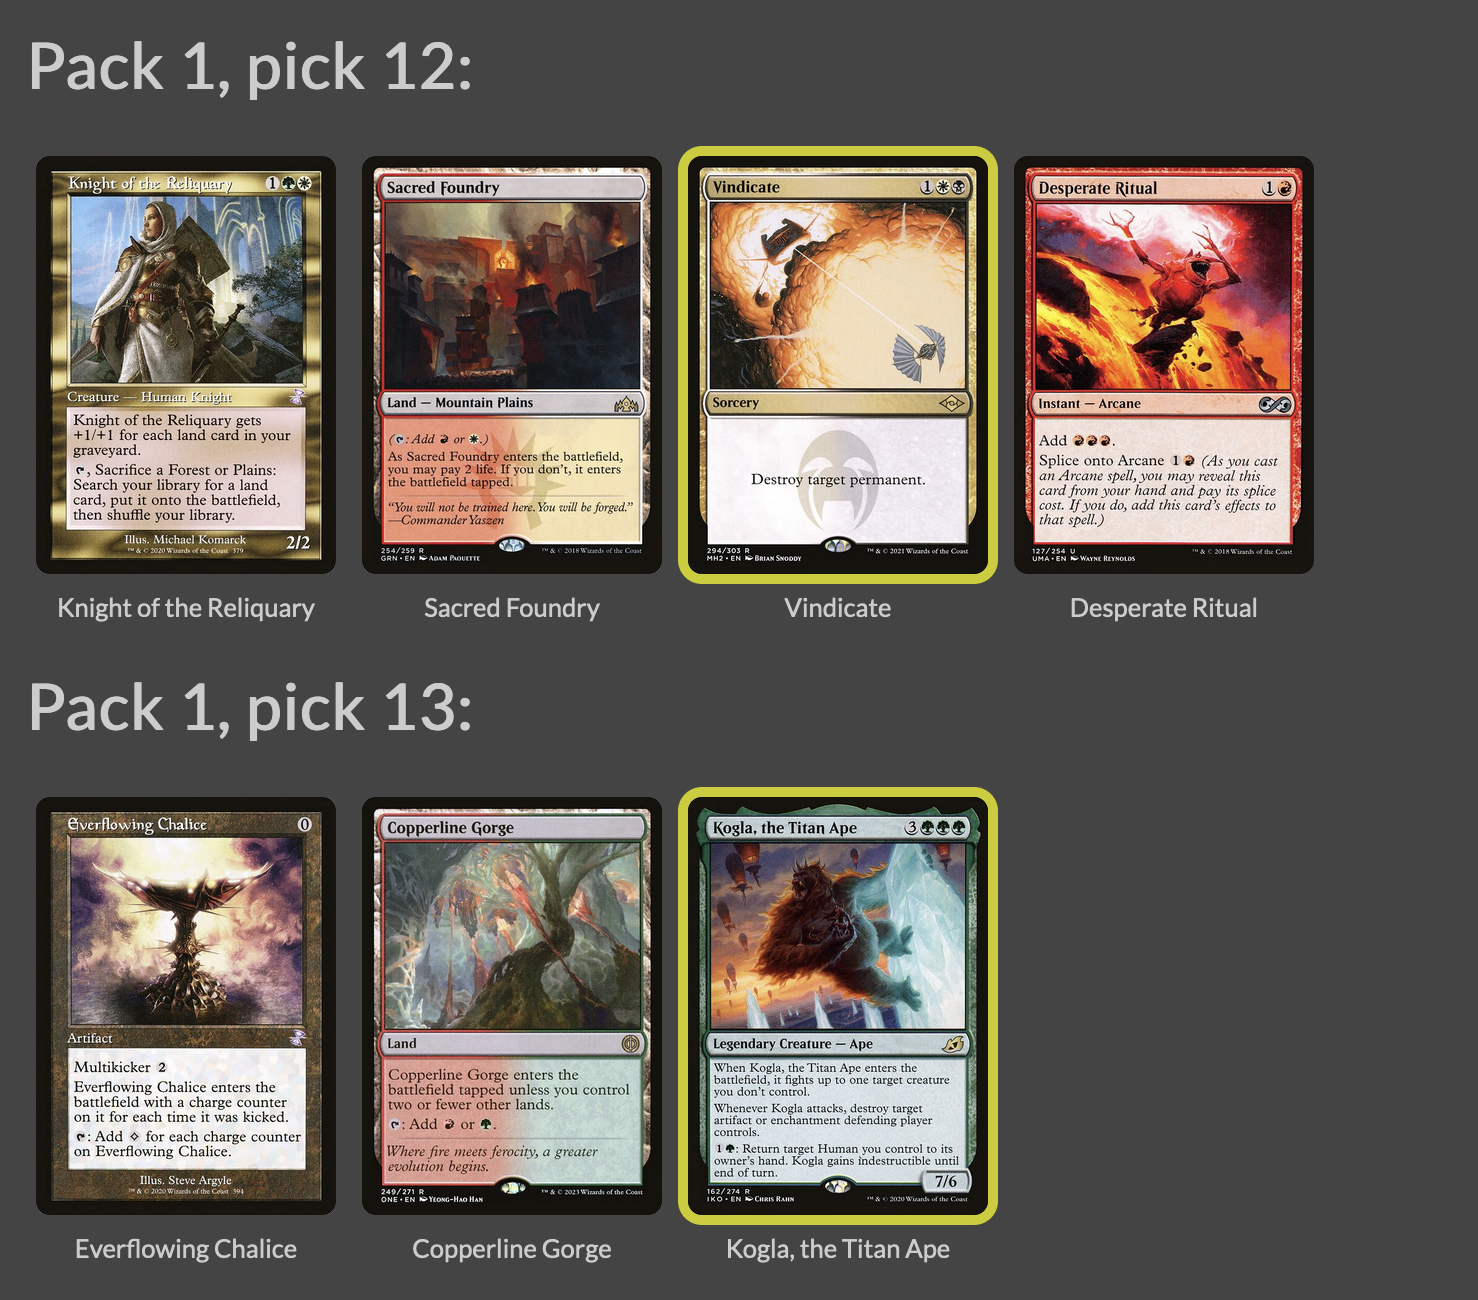 Pick 1, Packs 12 and 13